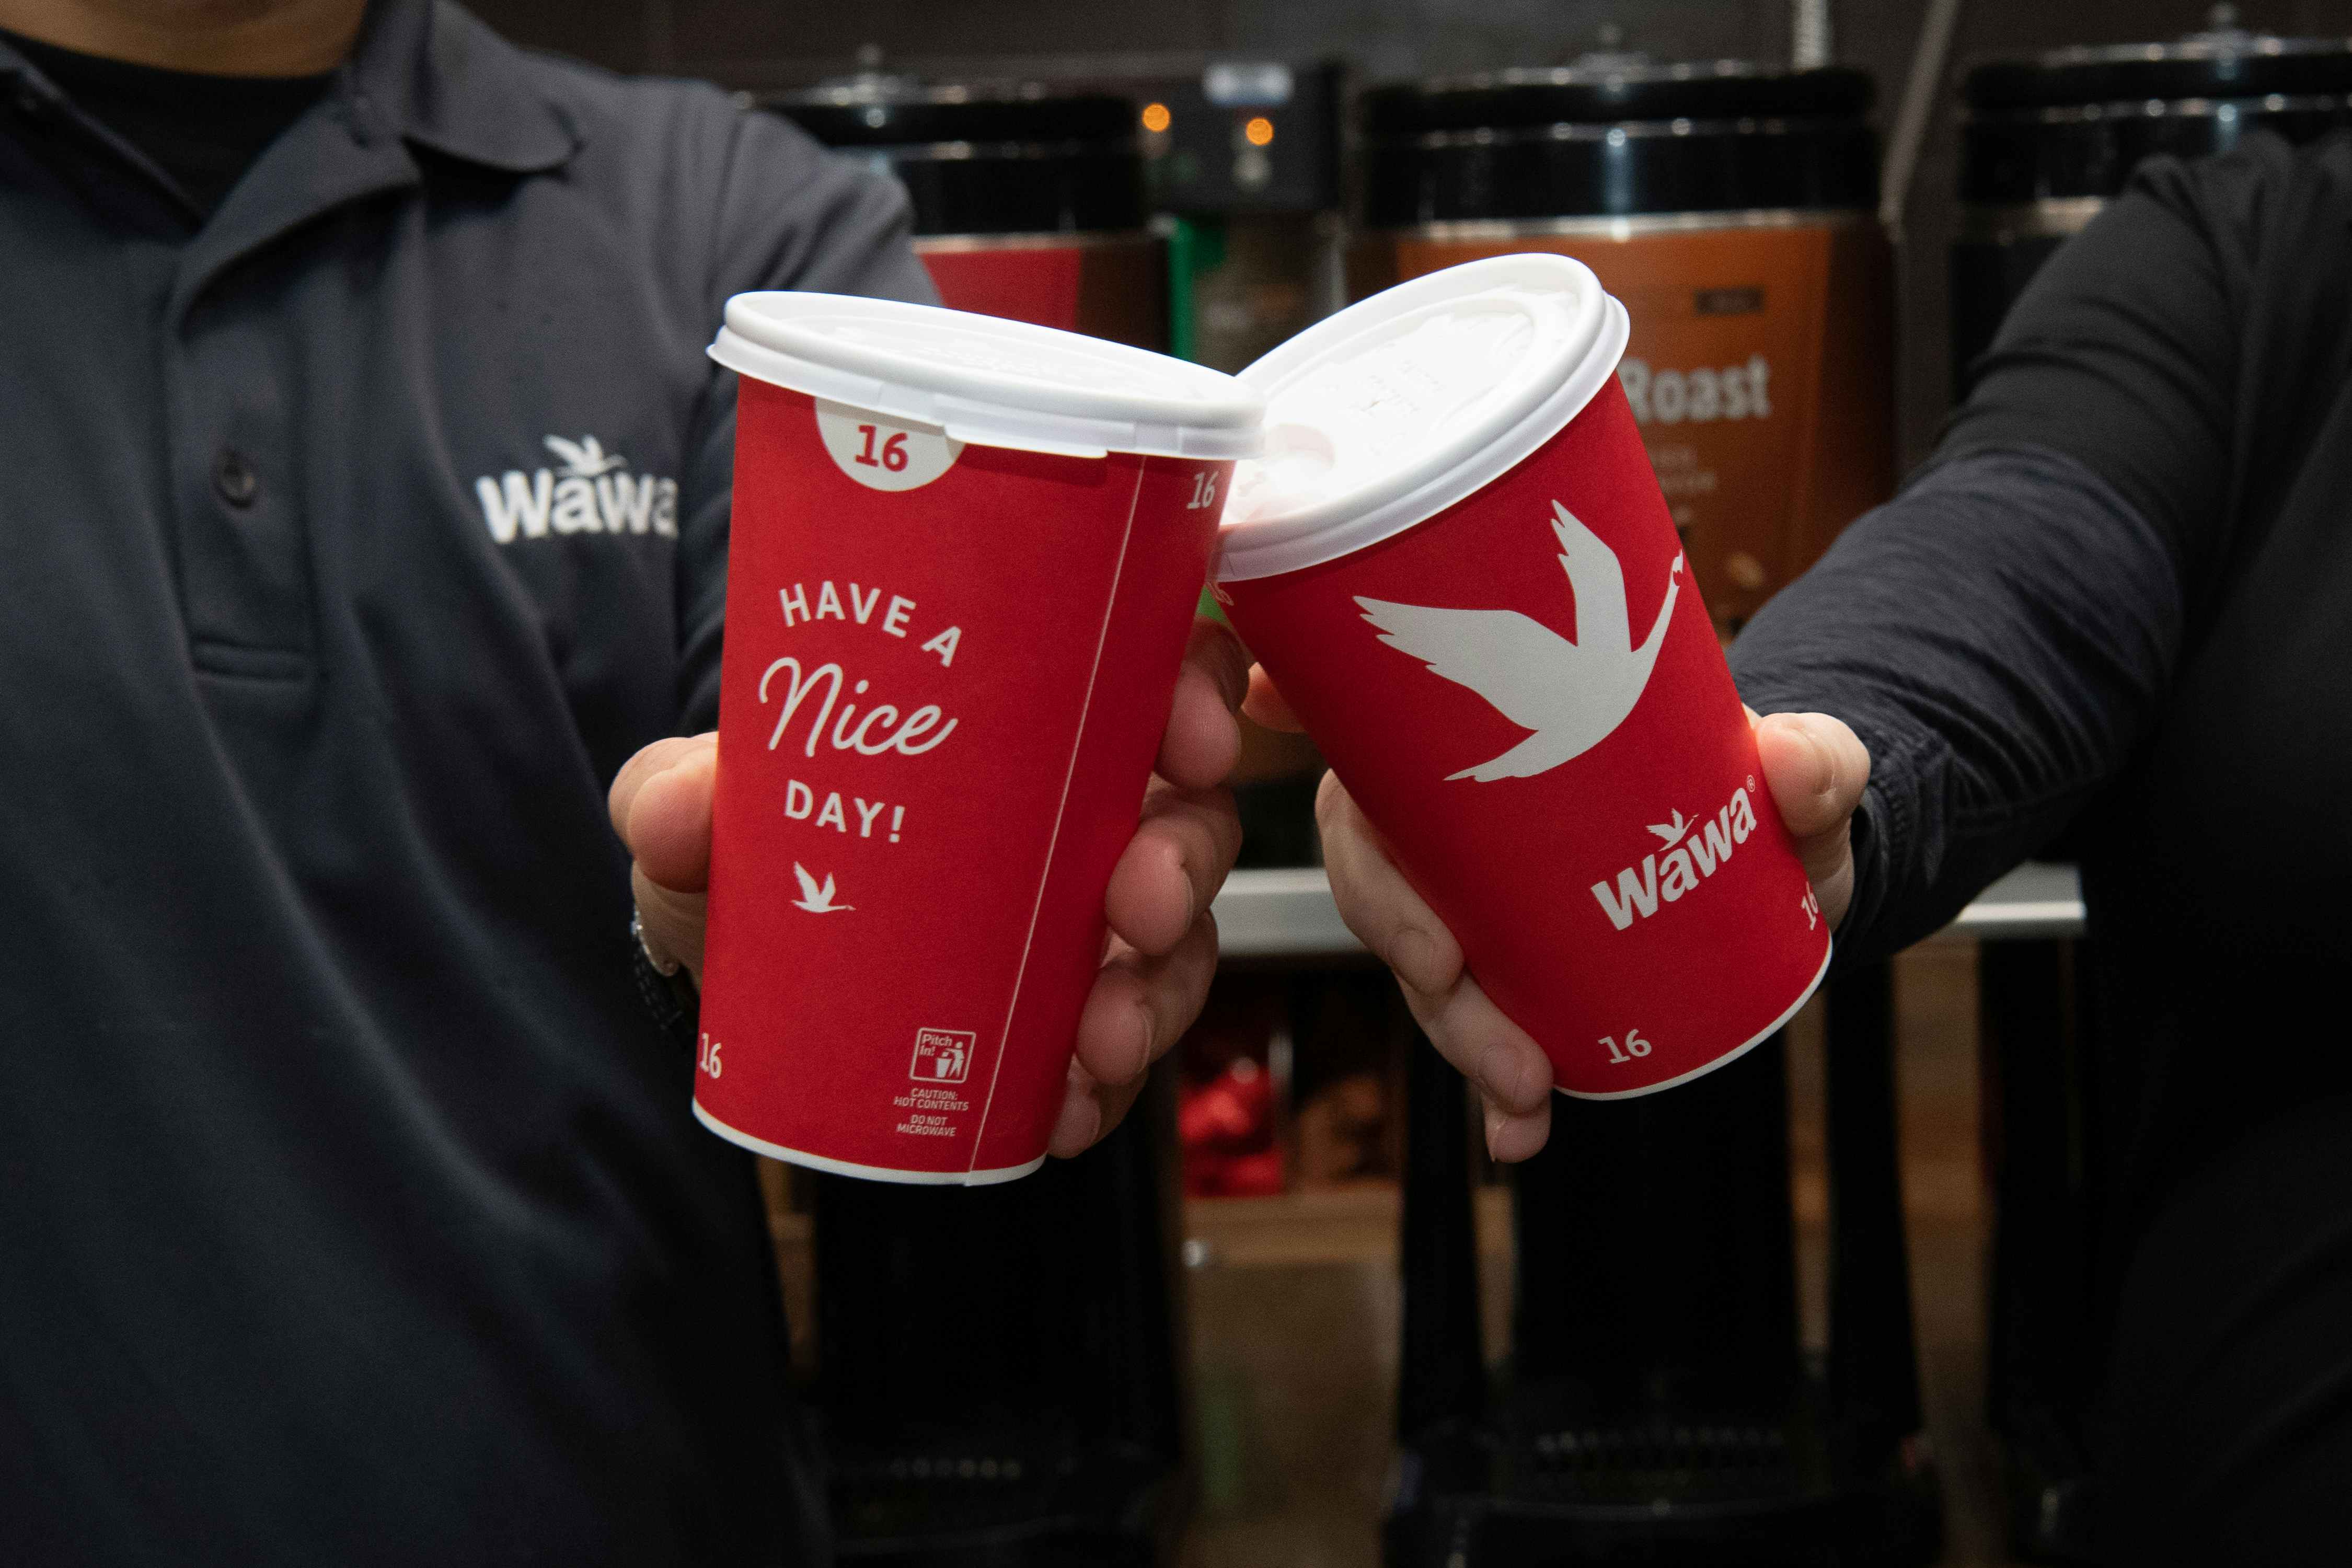 Wawa employees holding red coffee cups